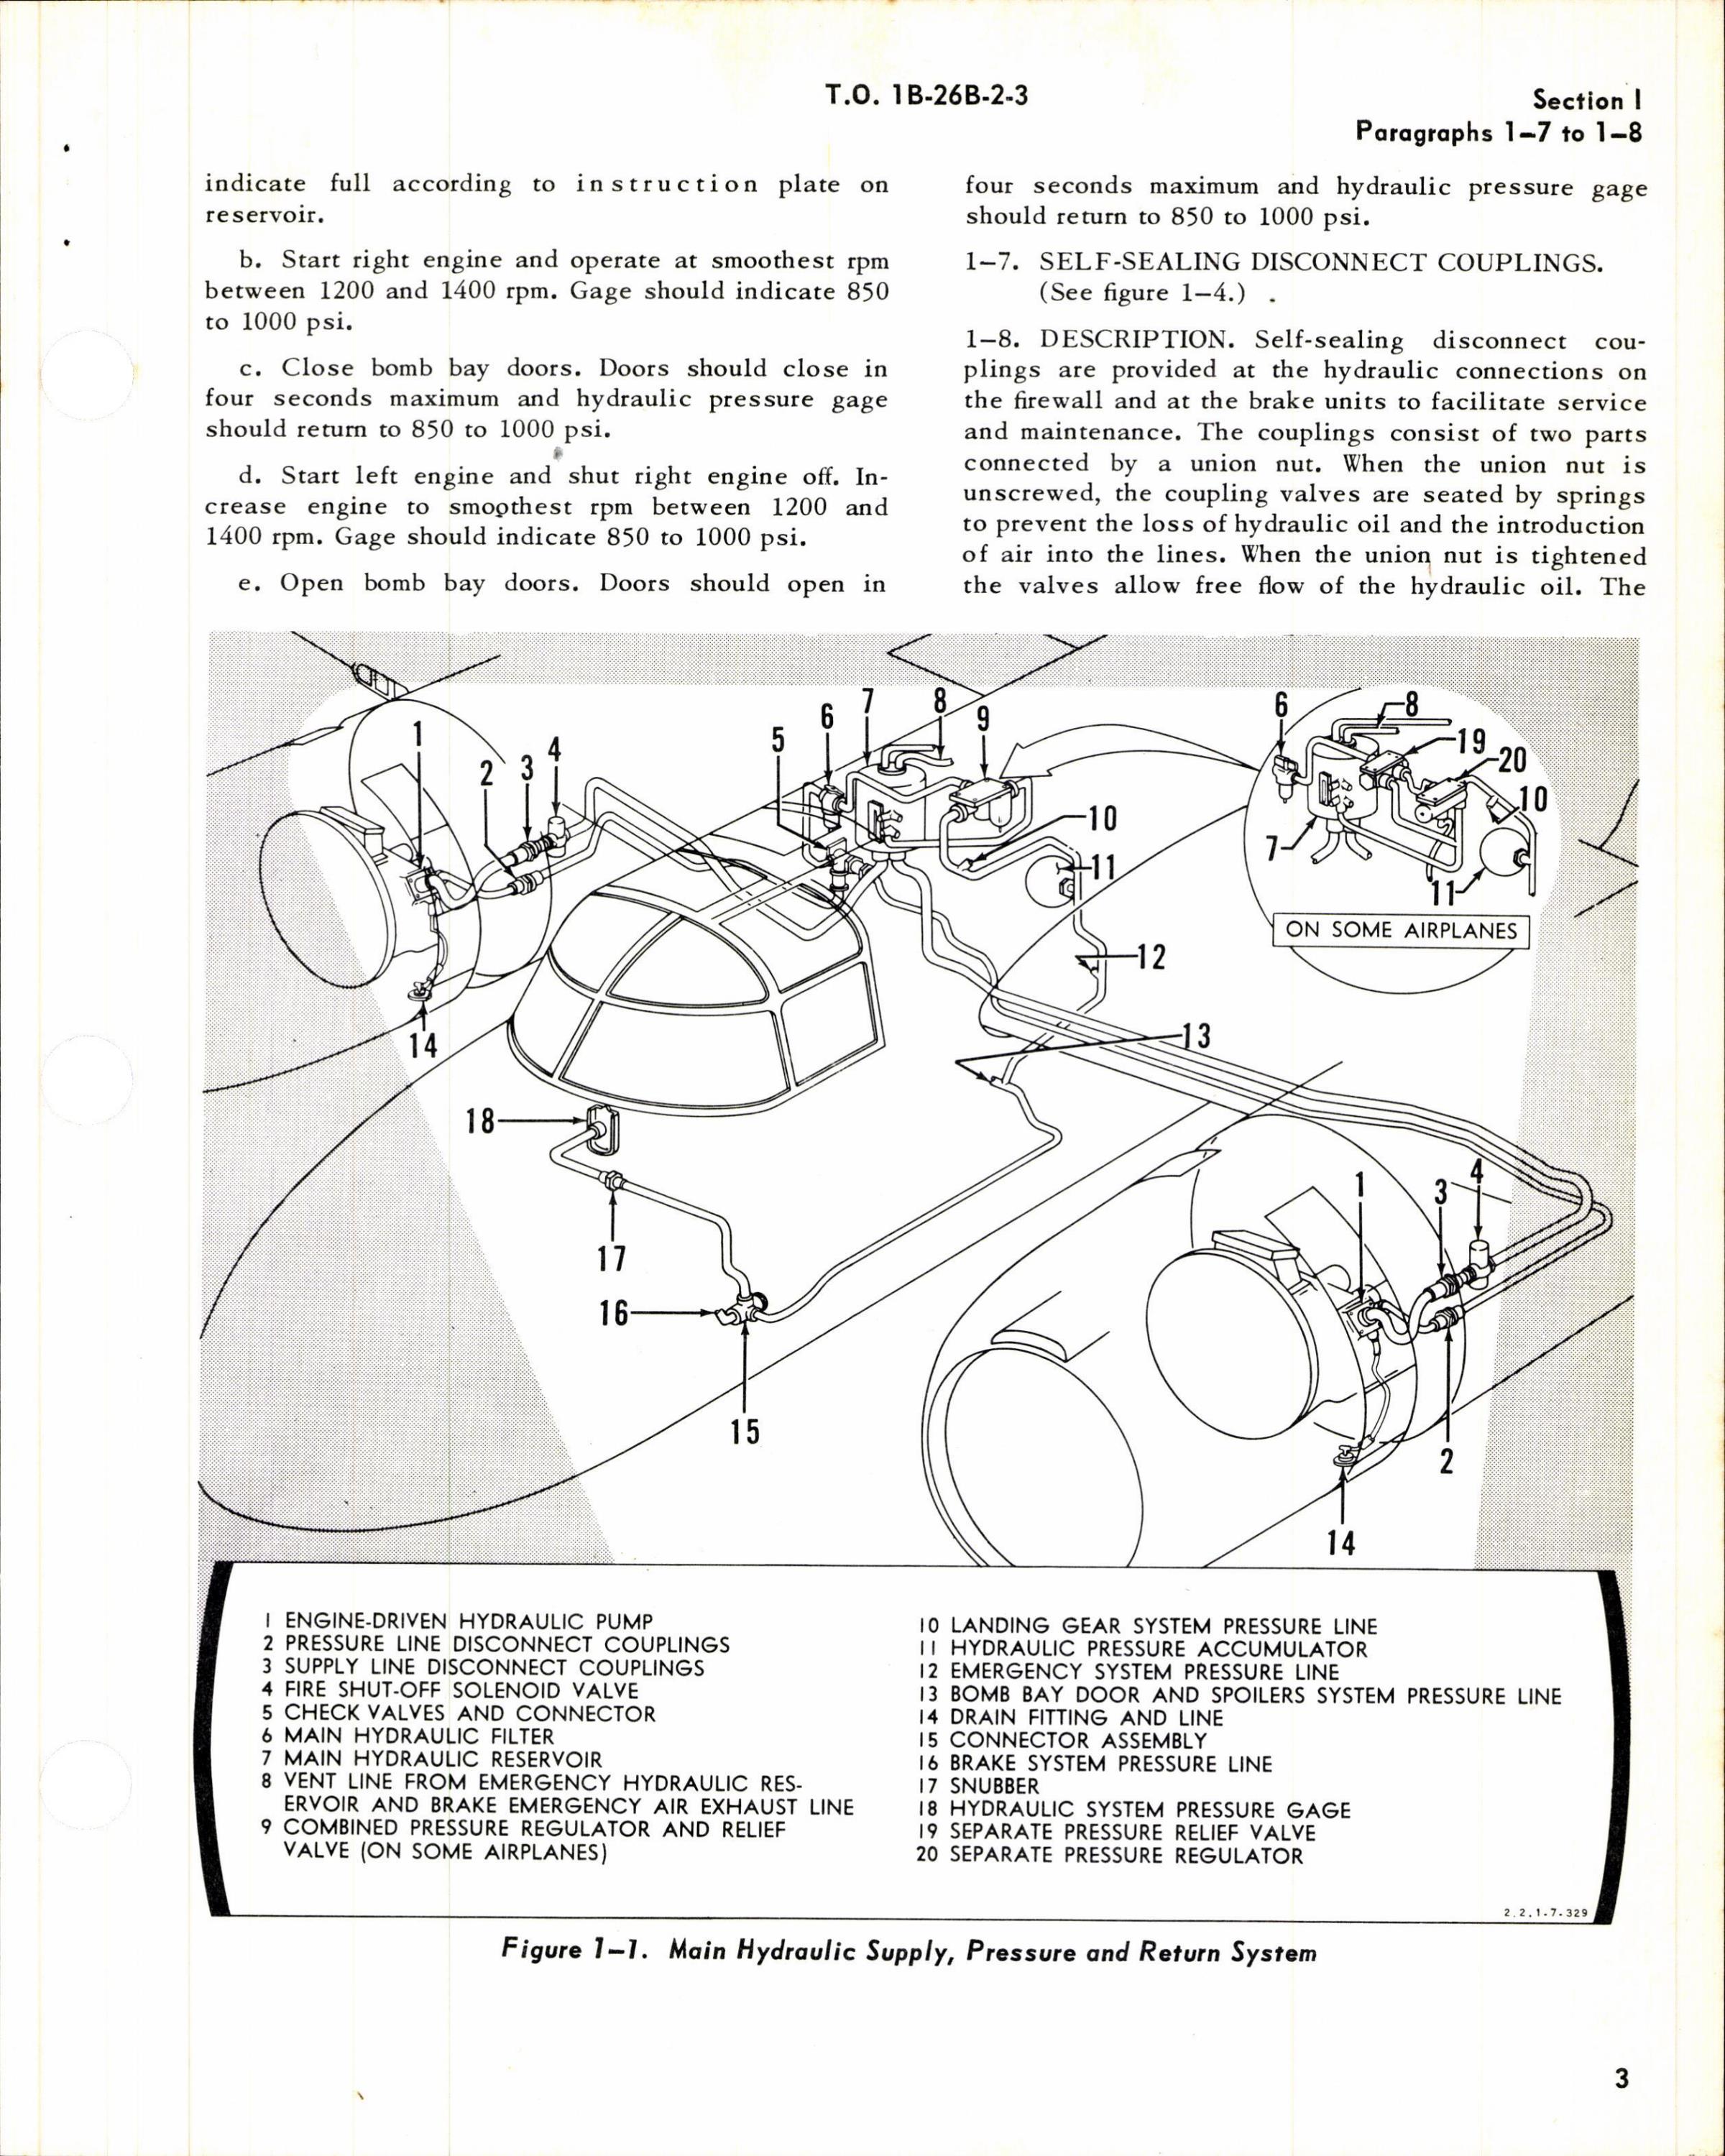 Sample page 3 from AirCorps Library document: Maintenance Instructions for Hydraulically Operated Systems for the B-26B, TB-26B, B-26C, and TB-26C